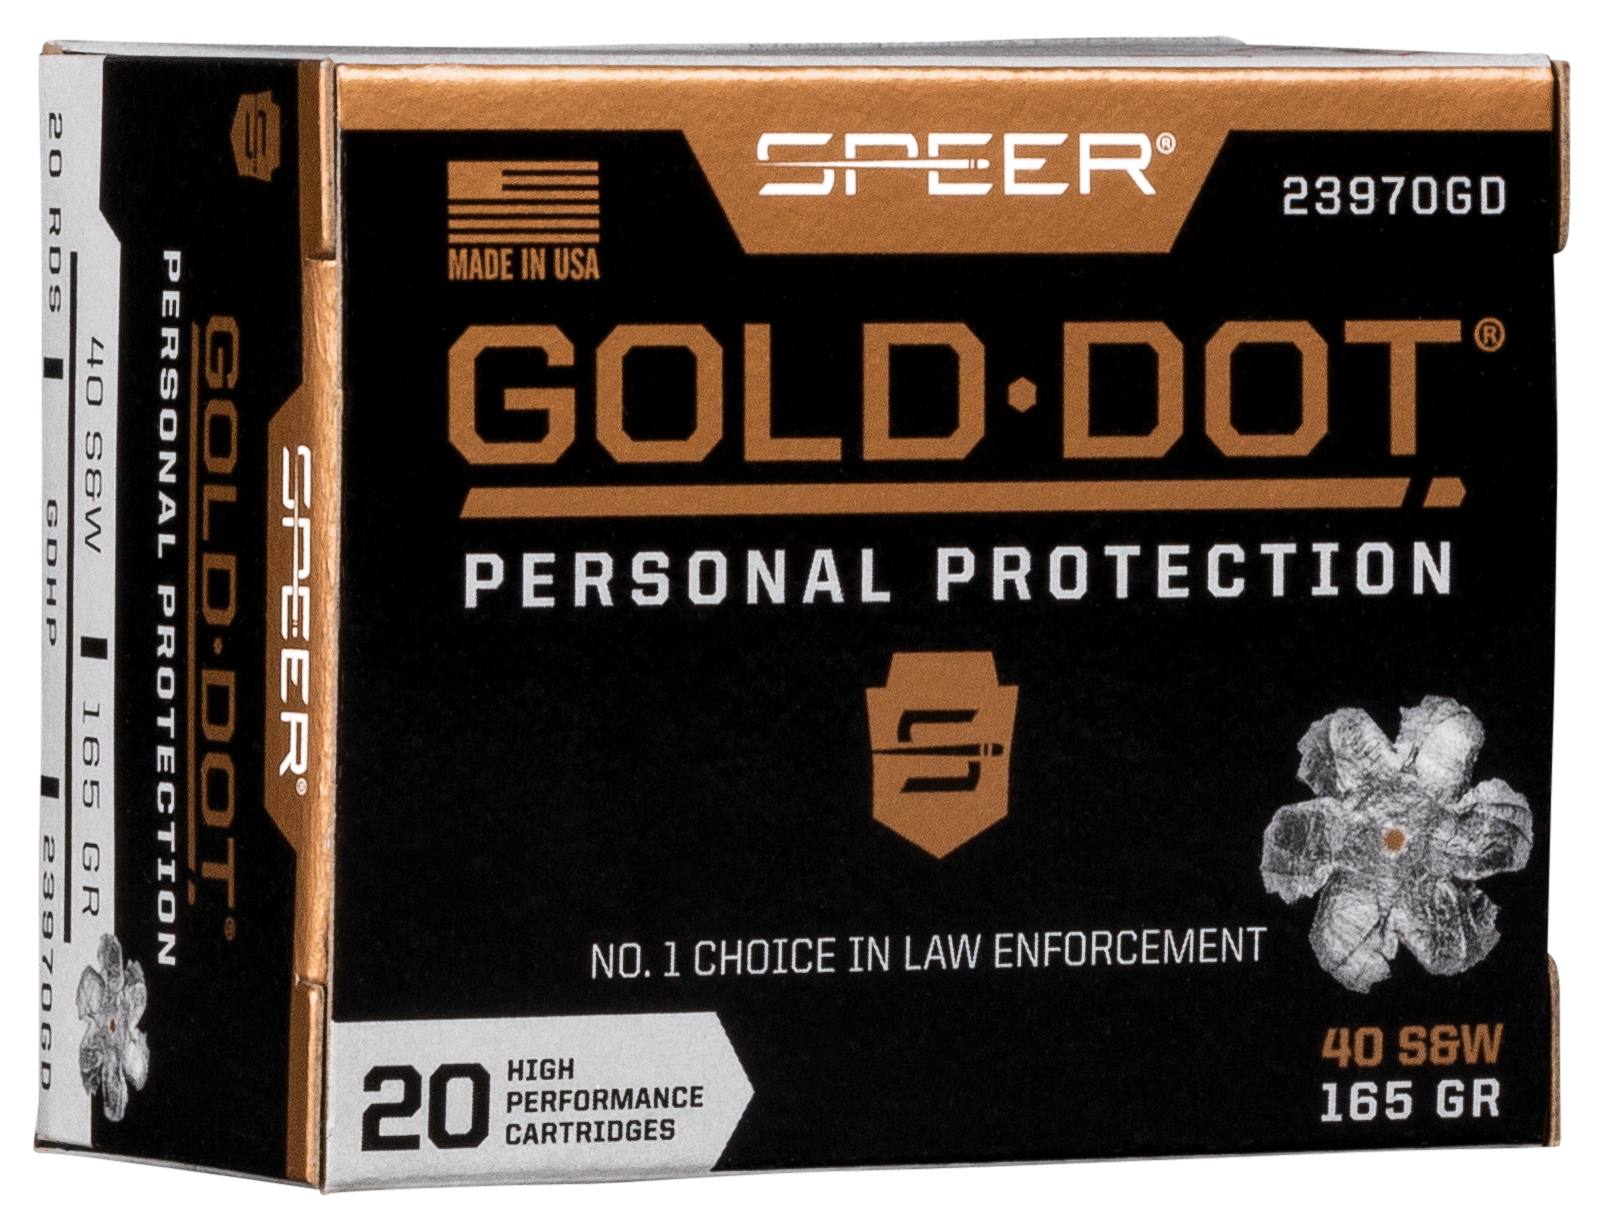 Buy Gold Dot Handgun Personal Protection for USD 42.99 | Speer